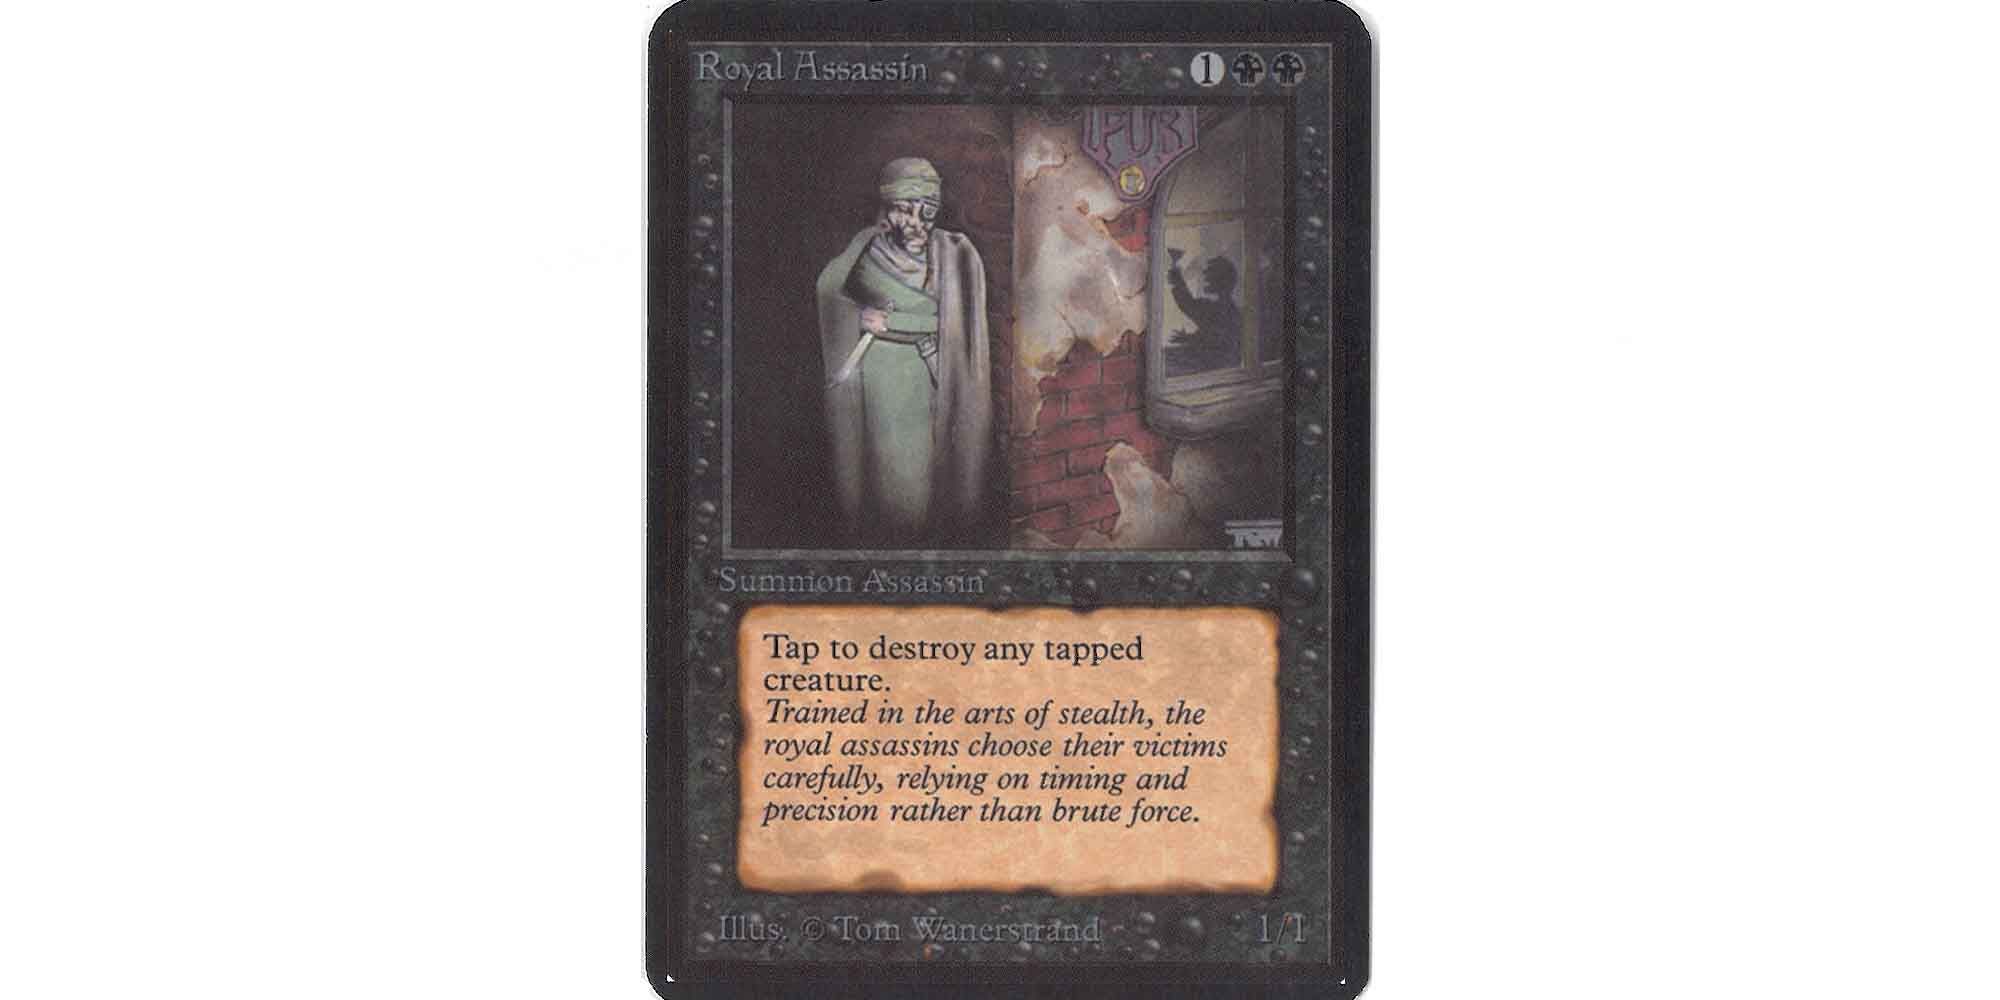 The Royal Assassin Magic the Gathering Card from the Alpha set